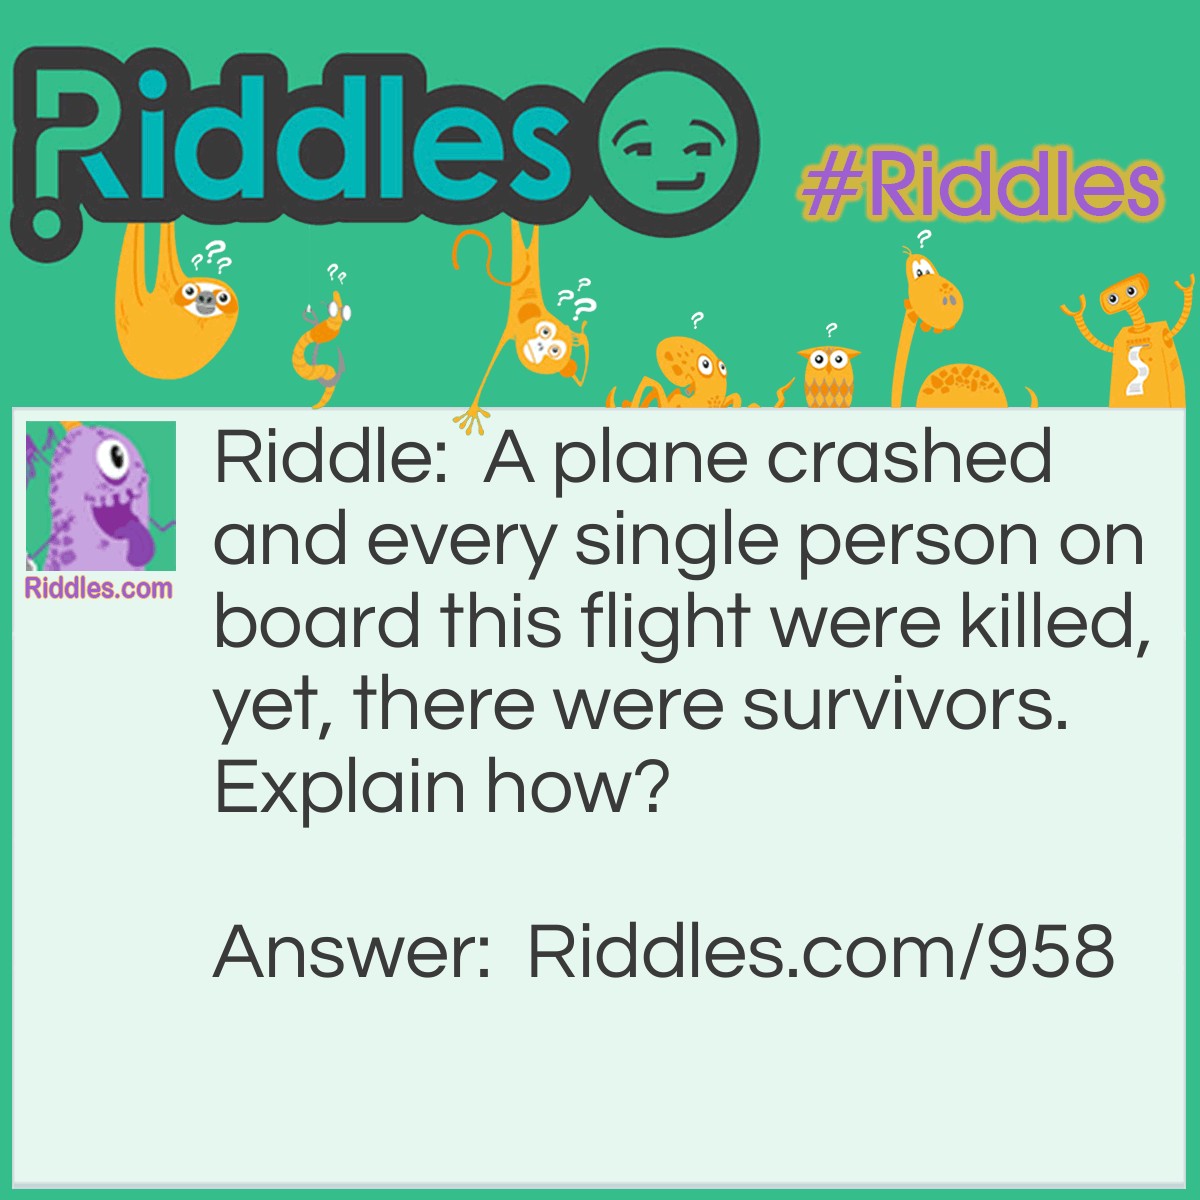 Riddle: A plane crashed and every single person on board this flight was killed, yet, there were survivors.
Explain how? Answer: The married people lived; the singles died.